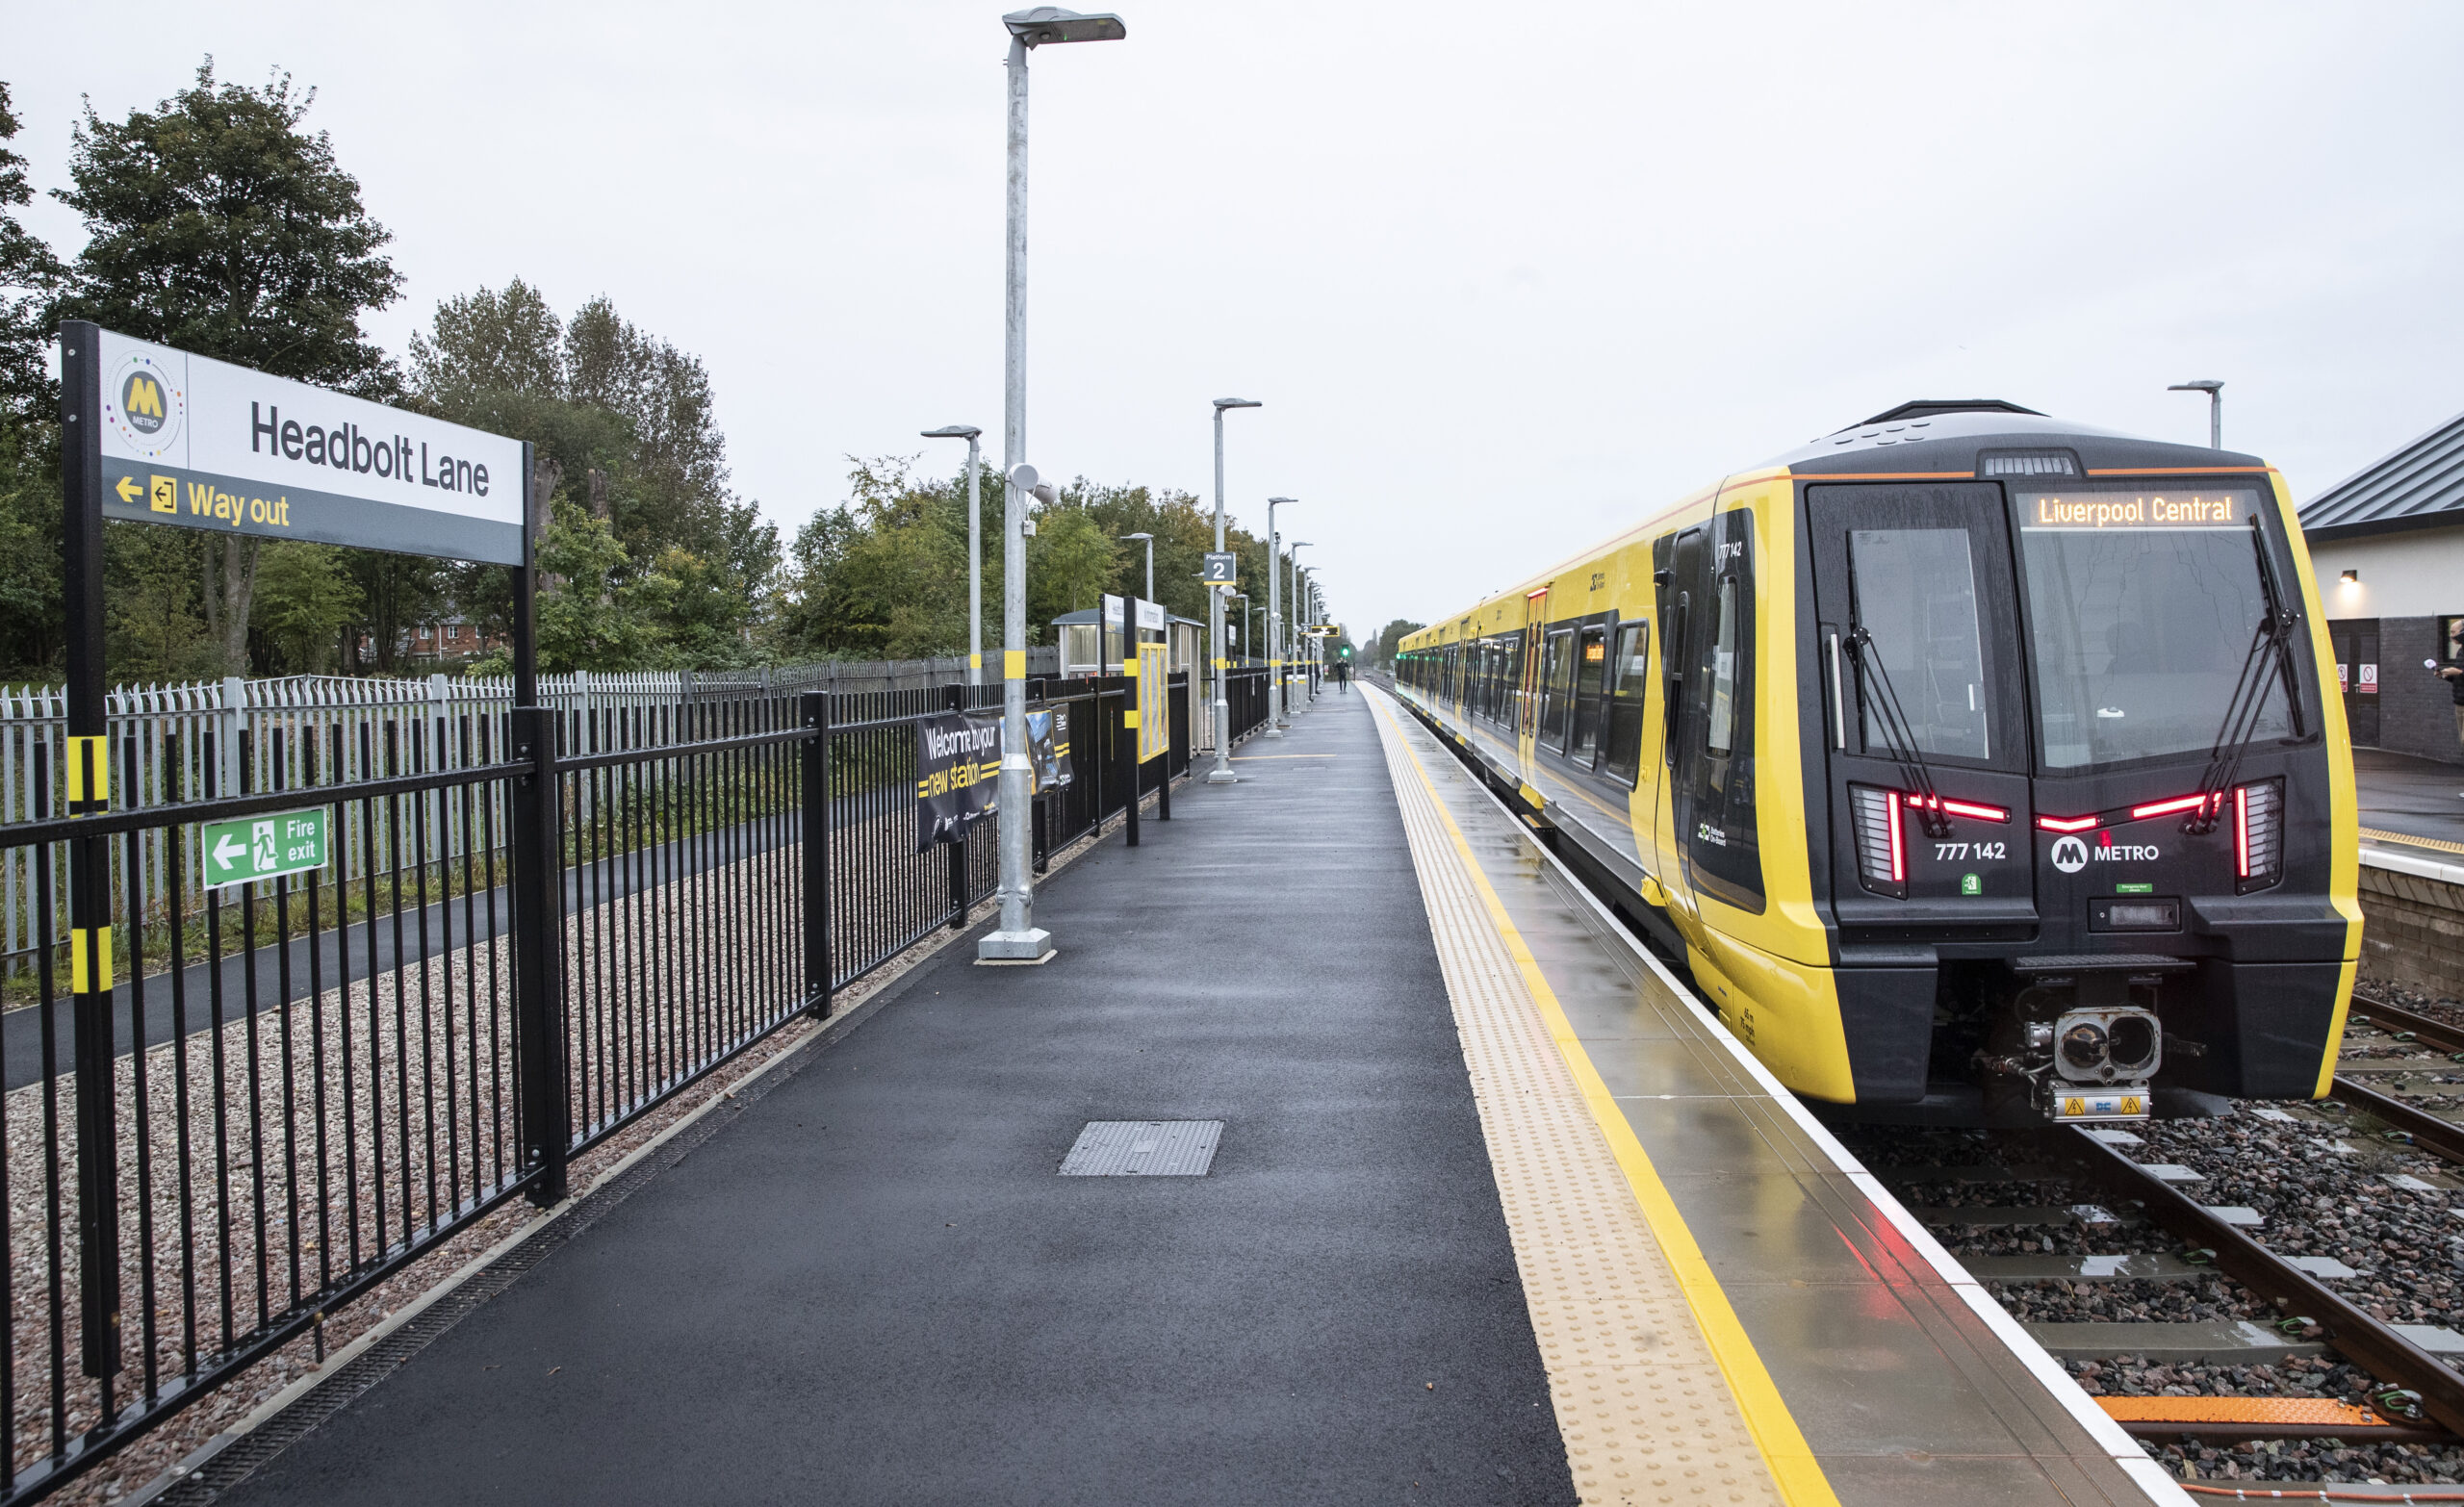 Headbolt Lane is an £80m, fully accessible train station